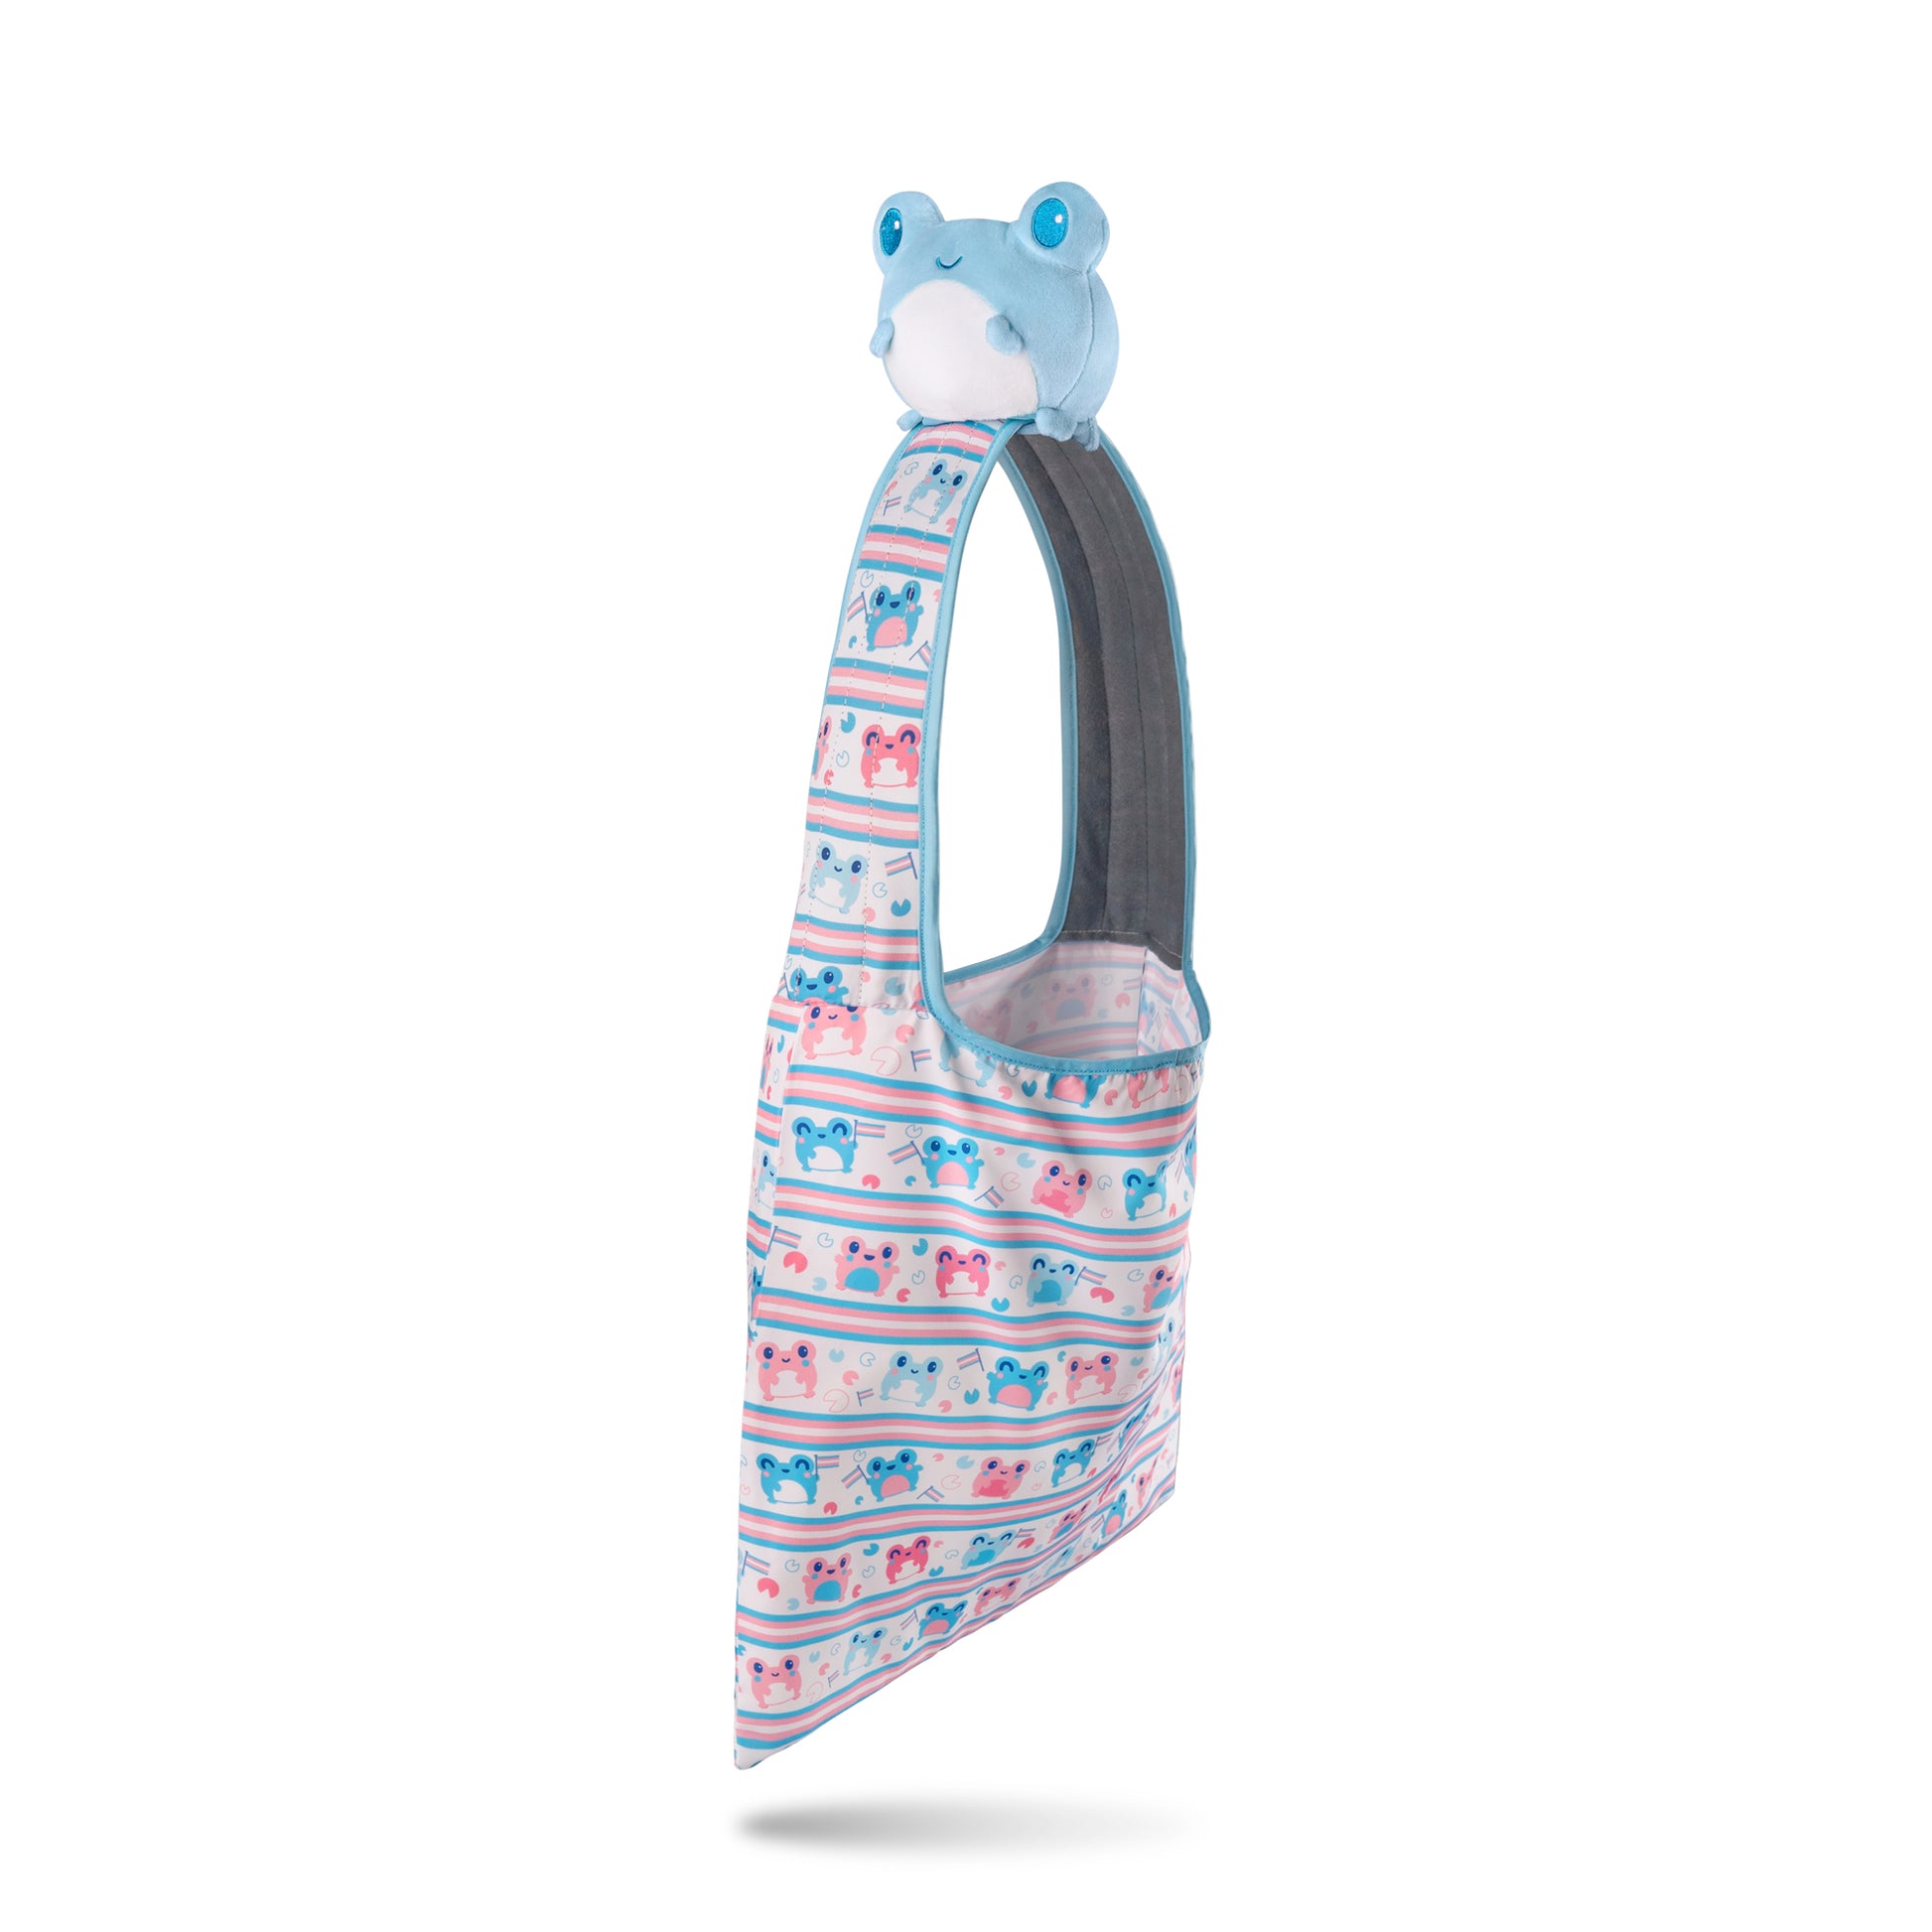 A blue and white TeeTurtle Plushiverse Trans Pride Frog Plushie tote bag featuring a cute teddy bear design.